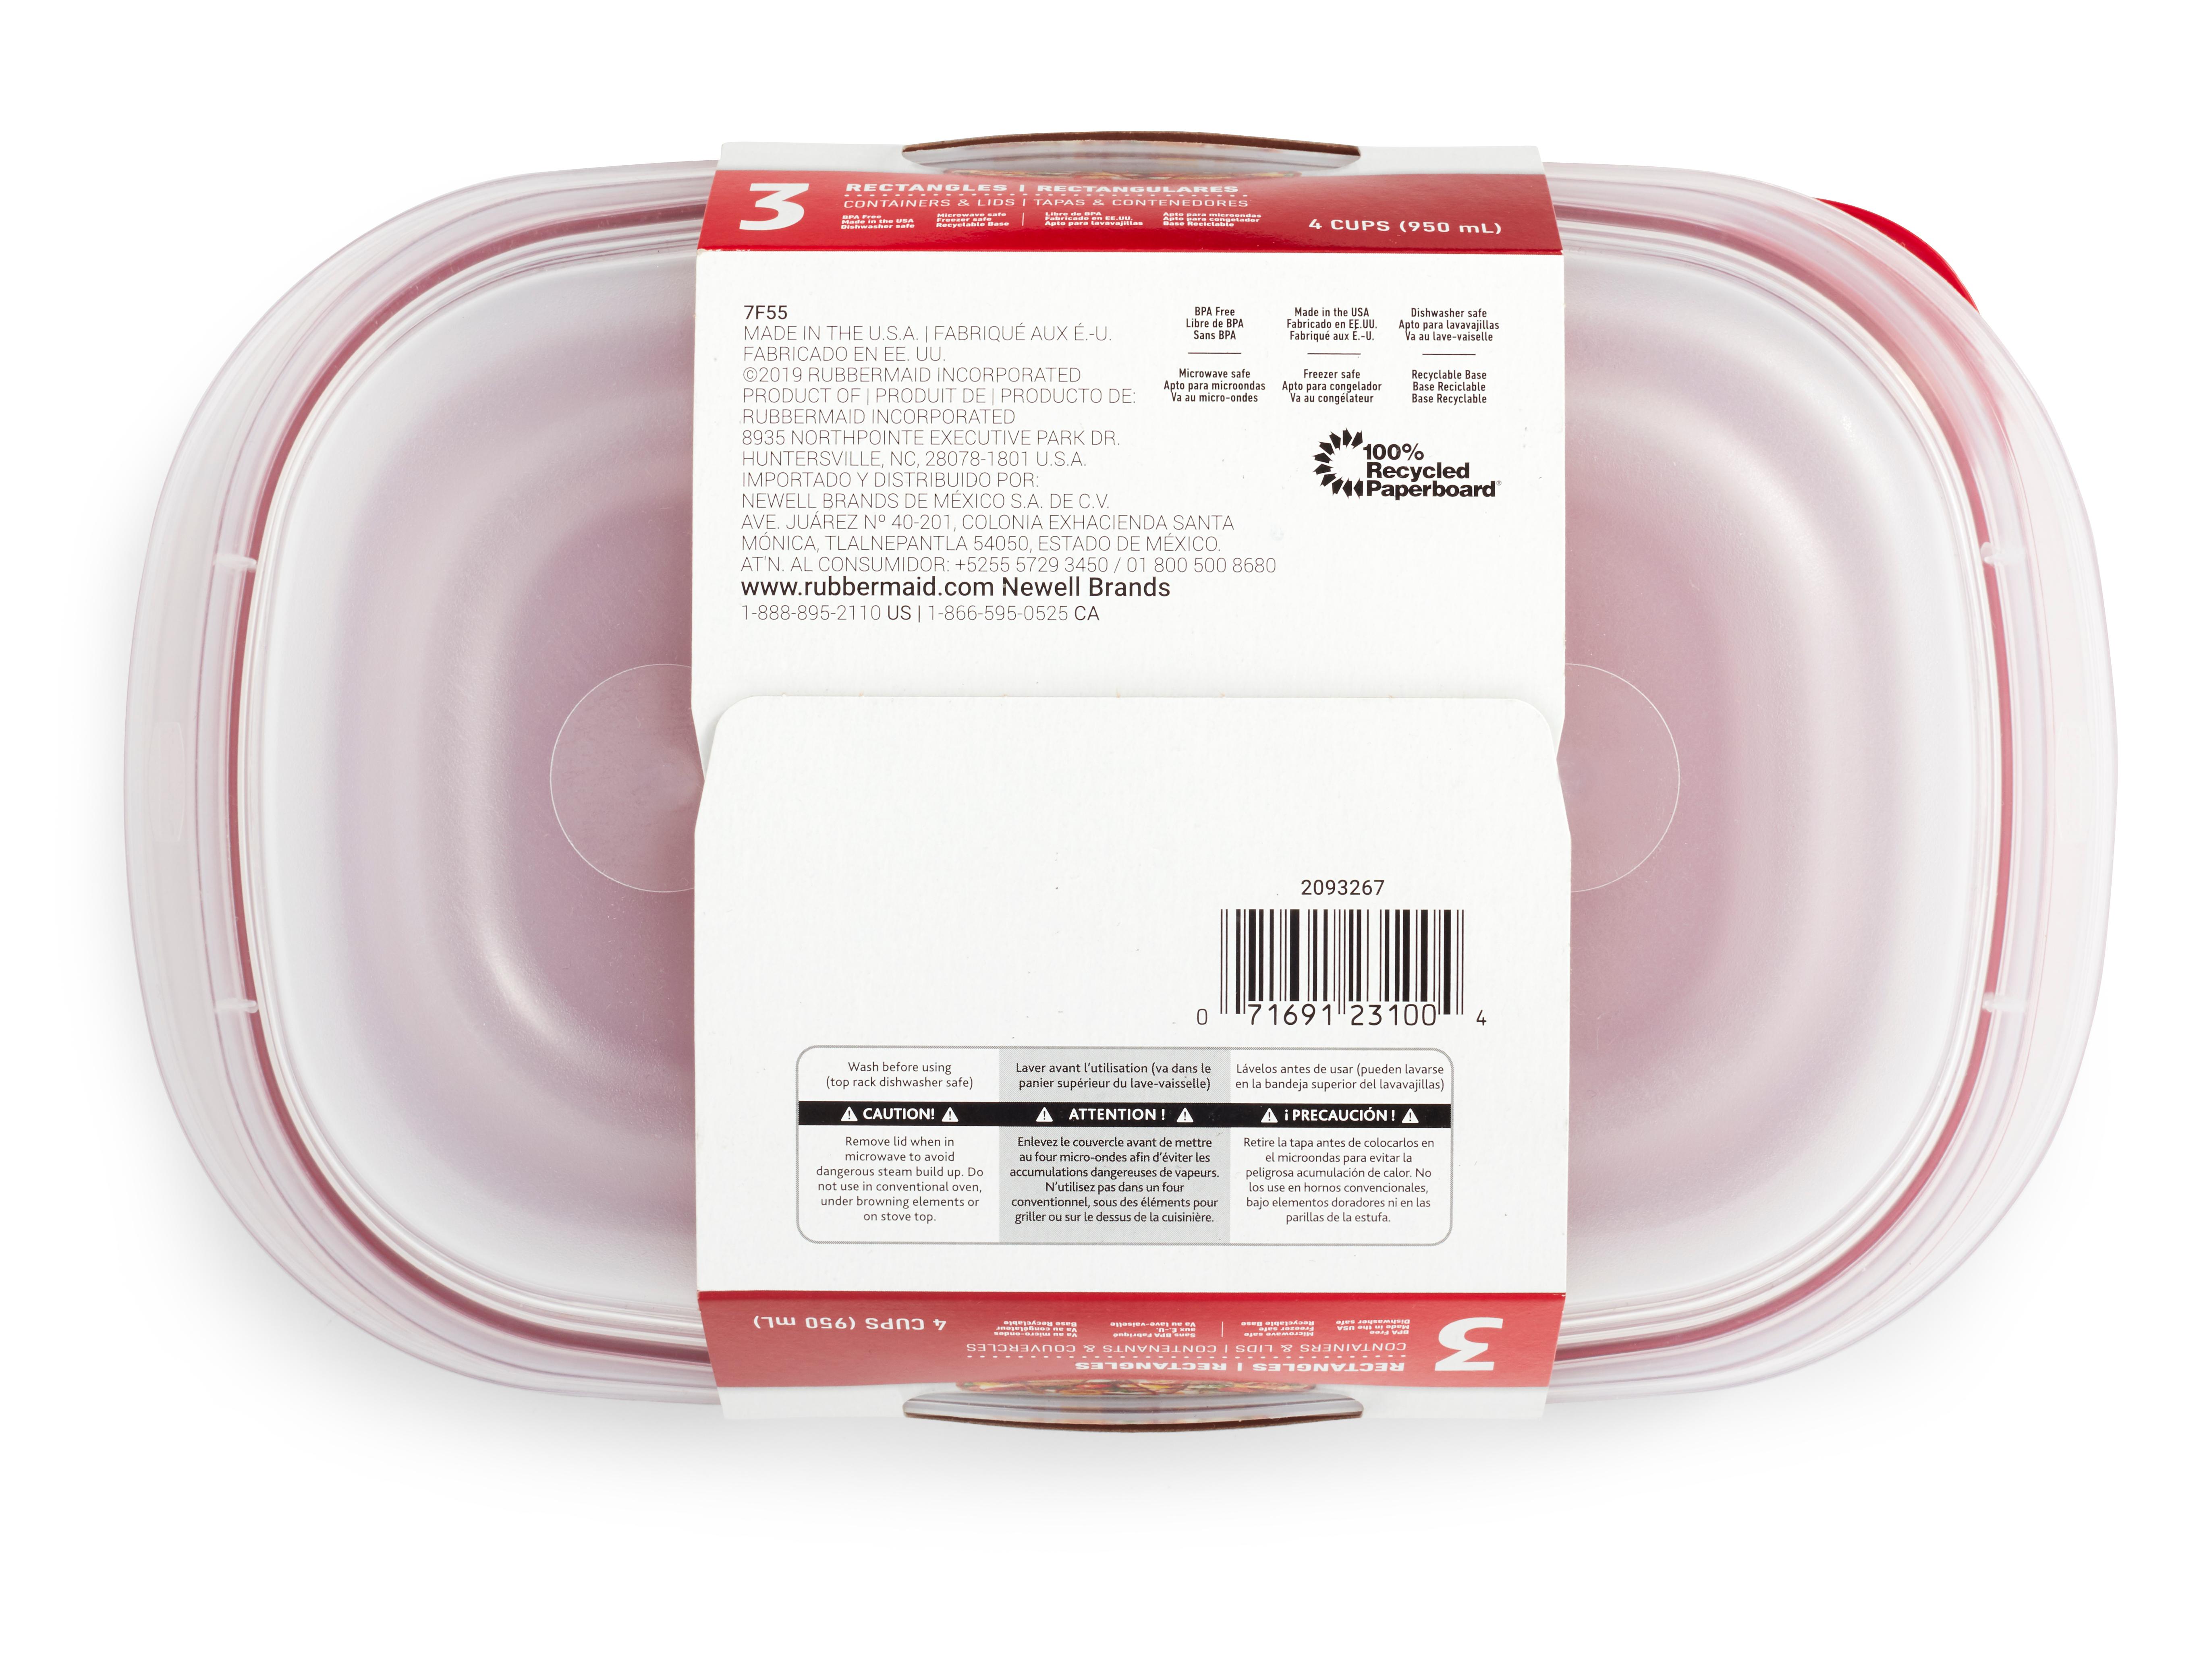 Rubbermaid TakeAlongs 4 Cup Rectangle Food Storage Containers, Set of 3, Red - image 5 of 7